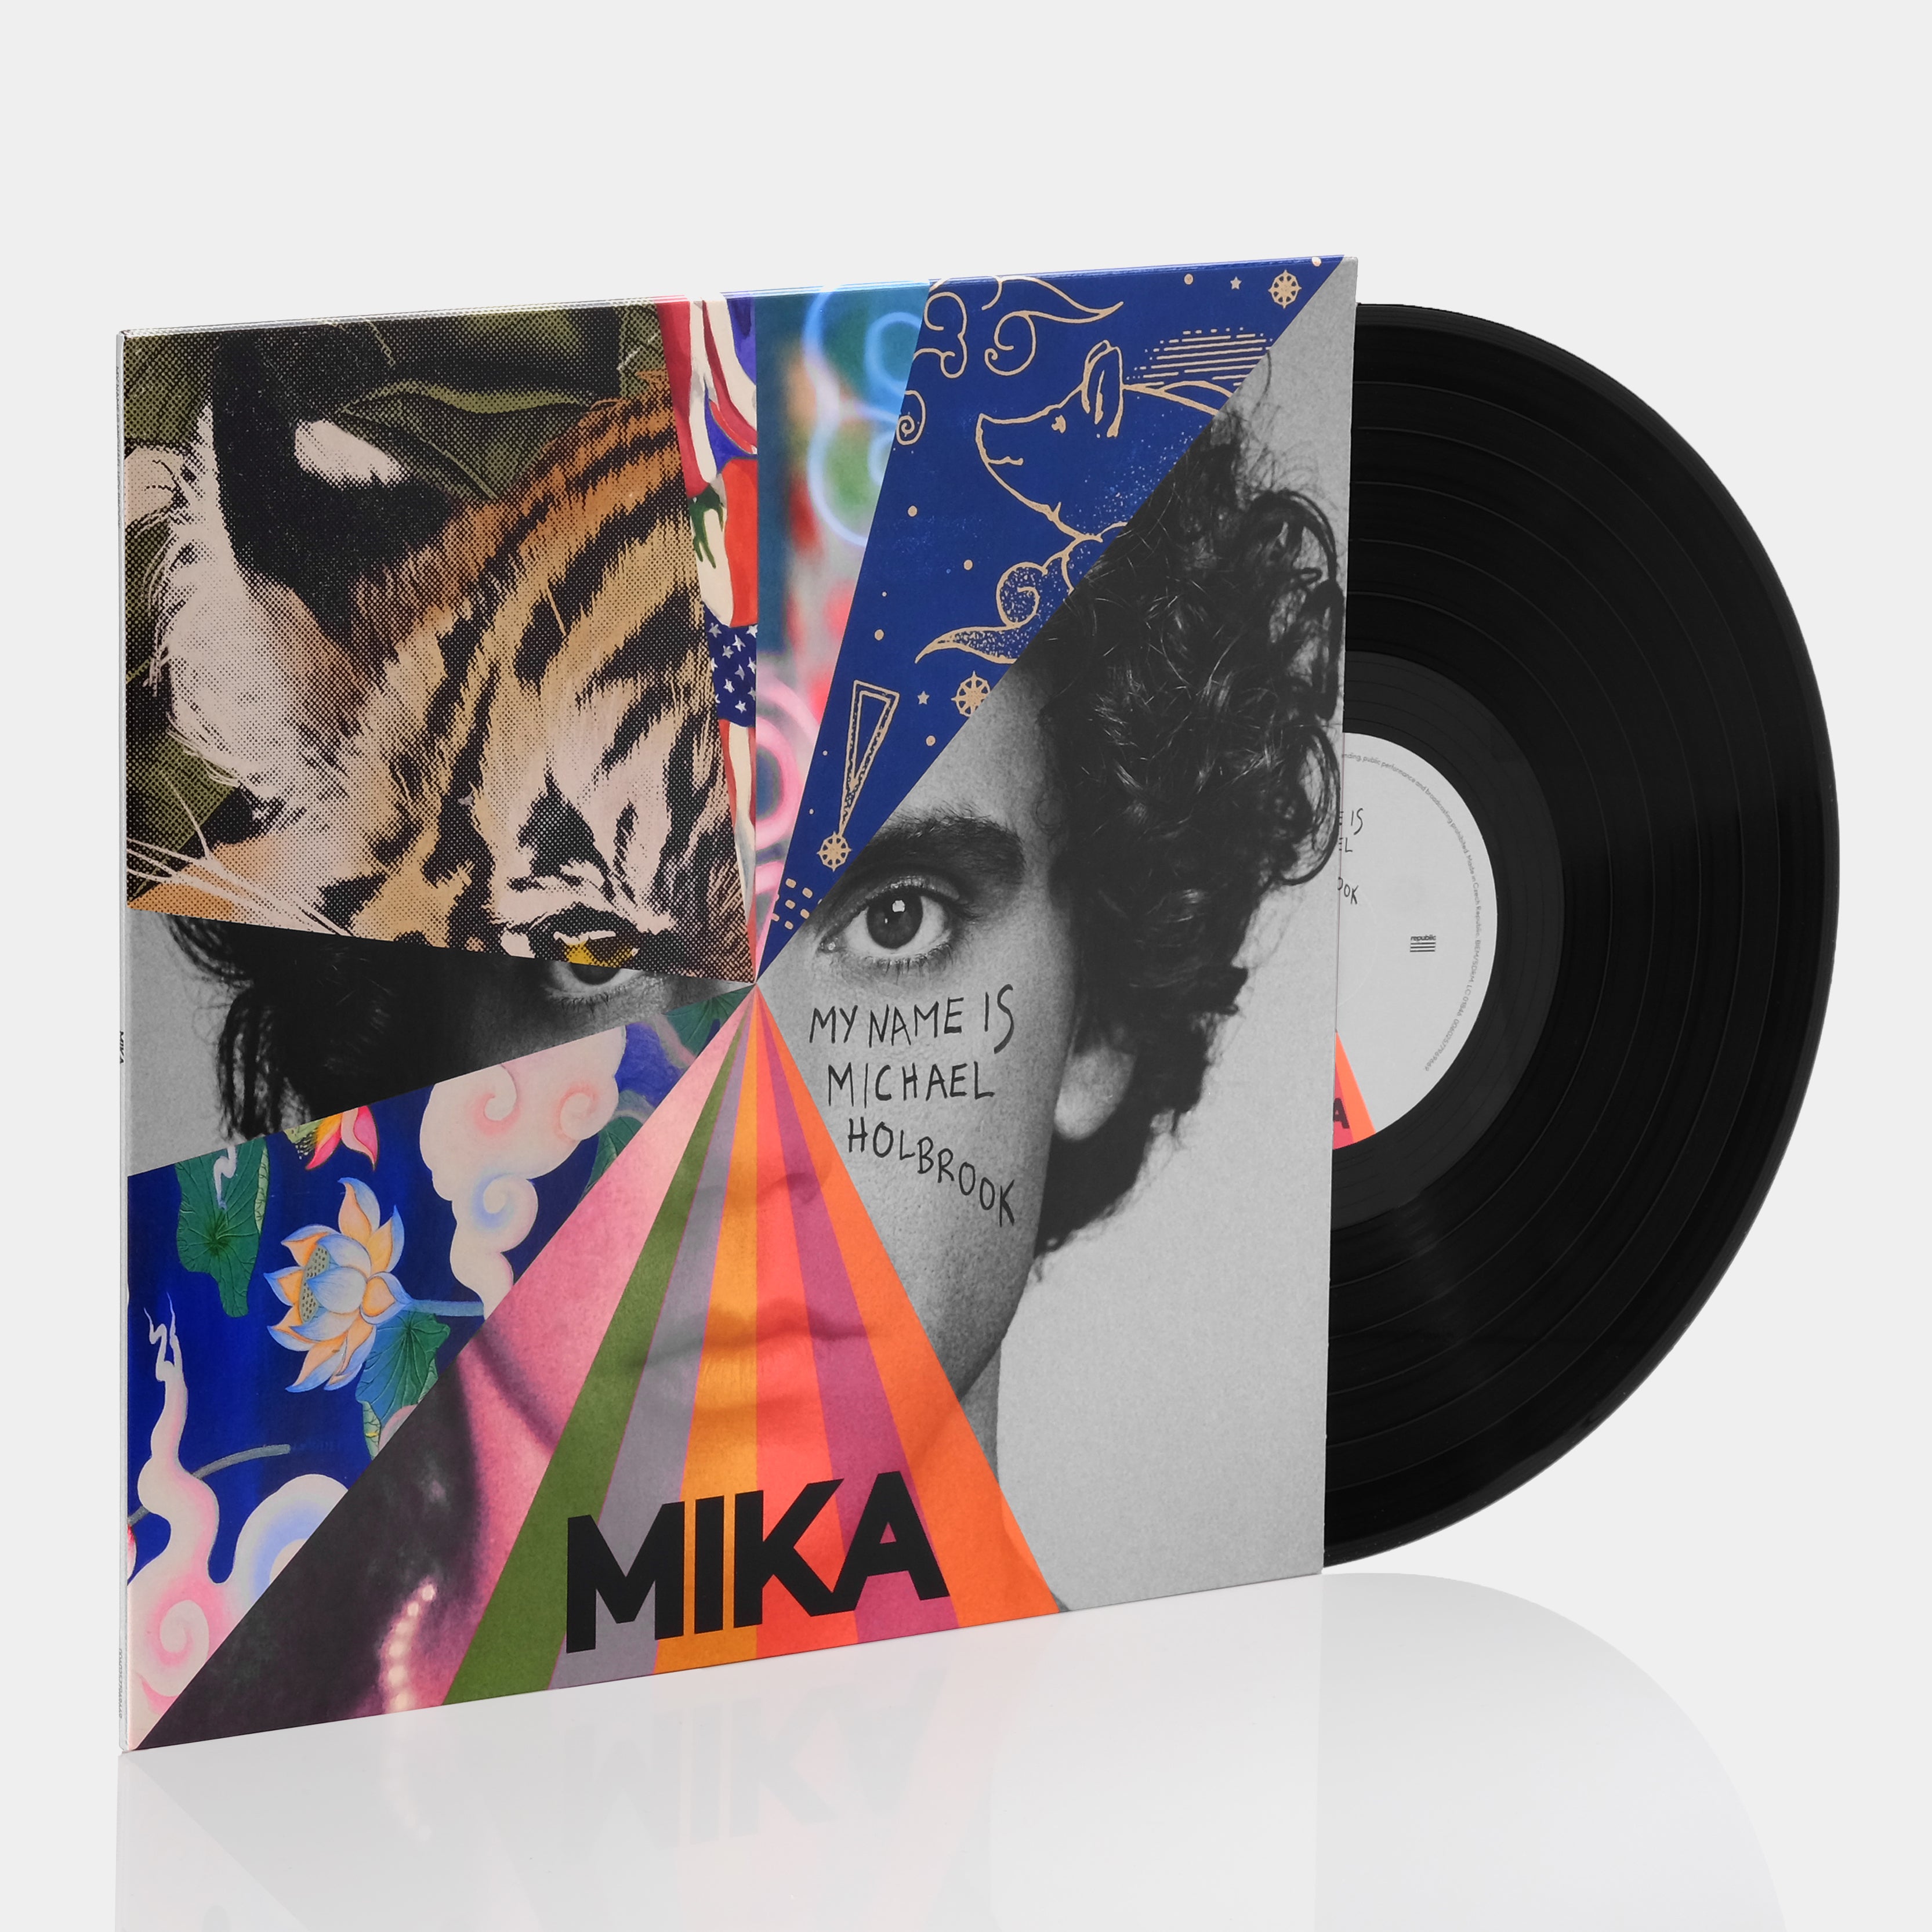 MIKA - My Name Is Michael Holbrook LP Vinyl Record